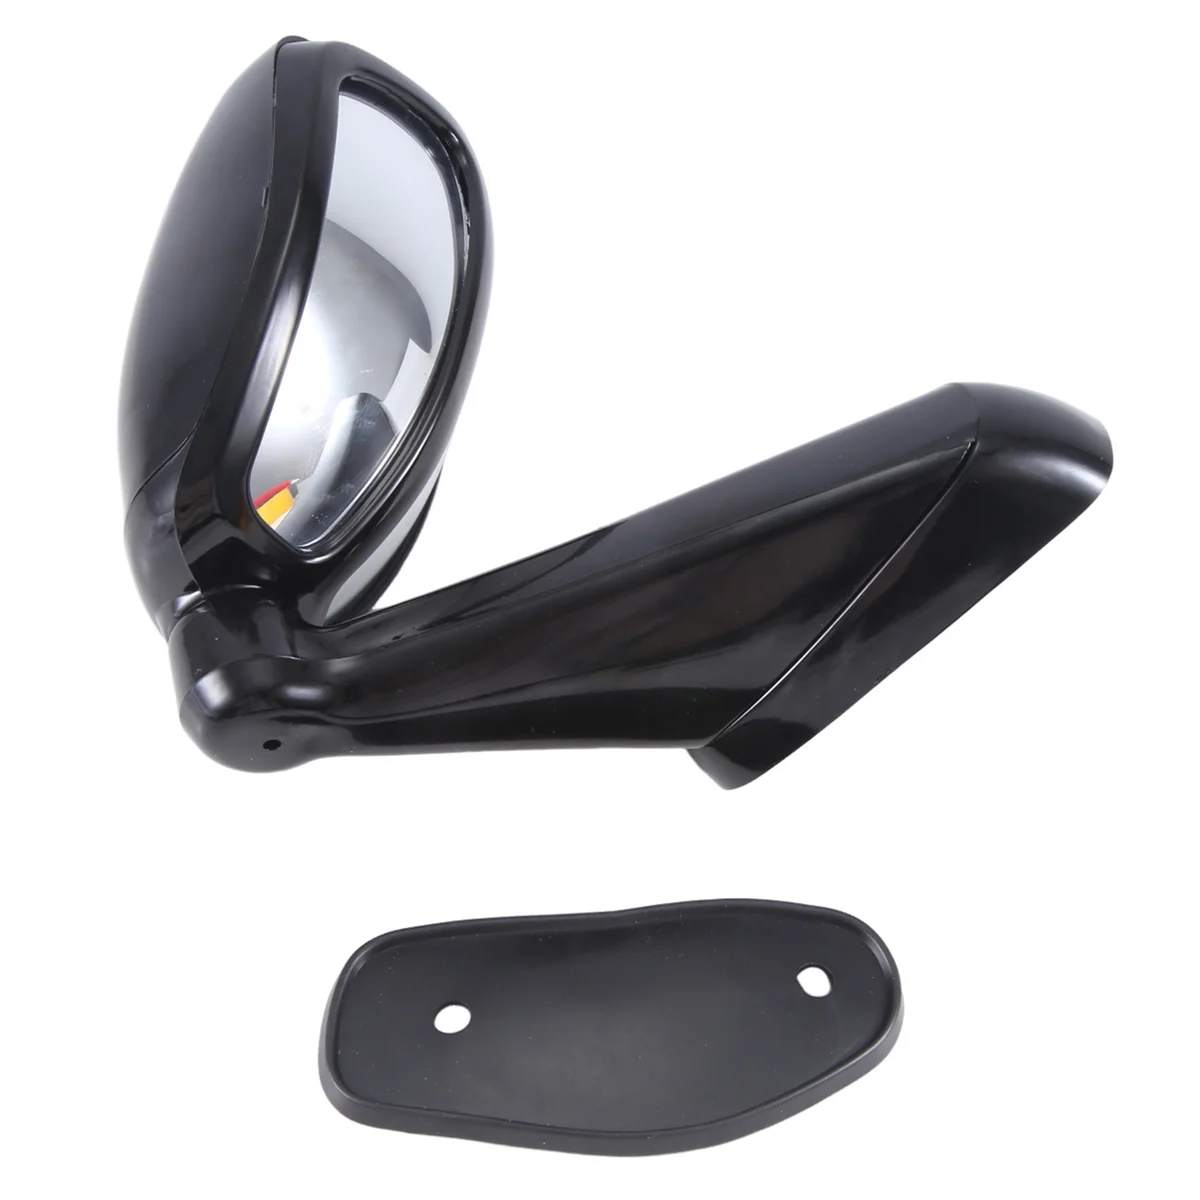 

Car Rear View Blind Spot Mirror Adjustable Wide Angle Rear View Mirrors Auto Hood Head Cover Sand Plate Side Mirror for Suv